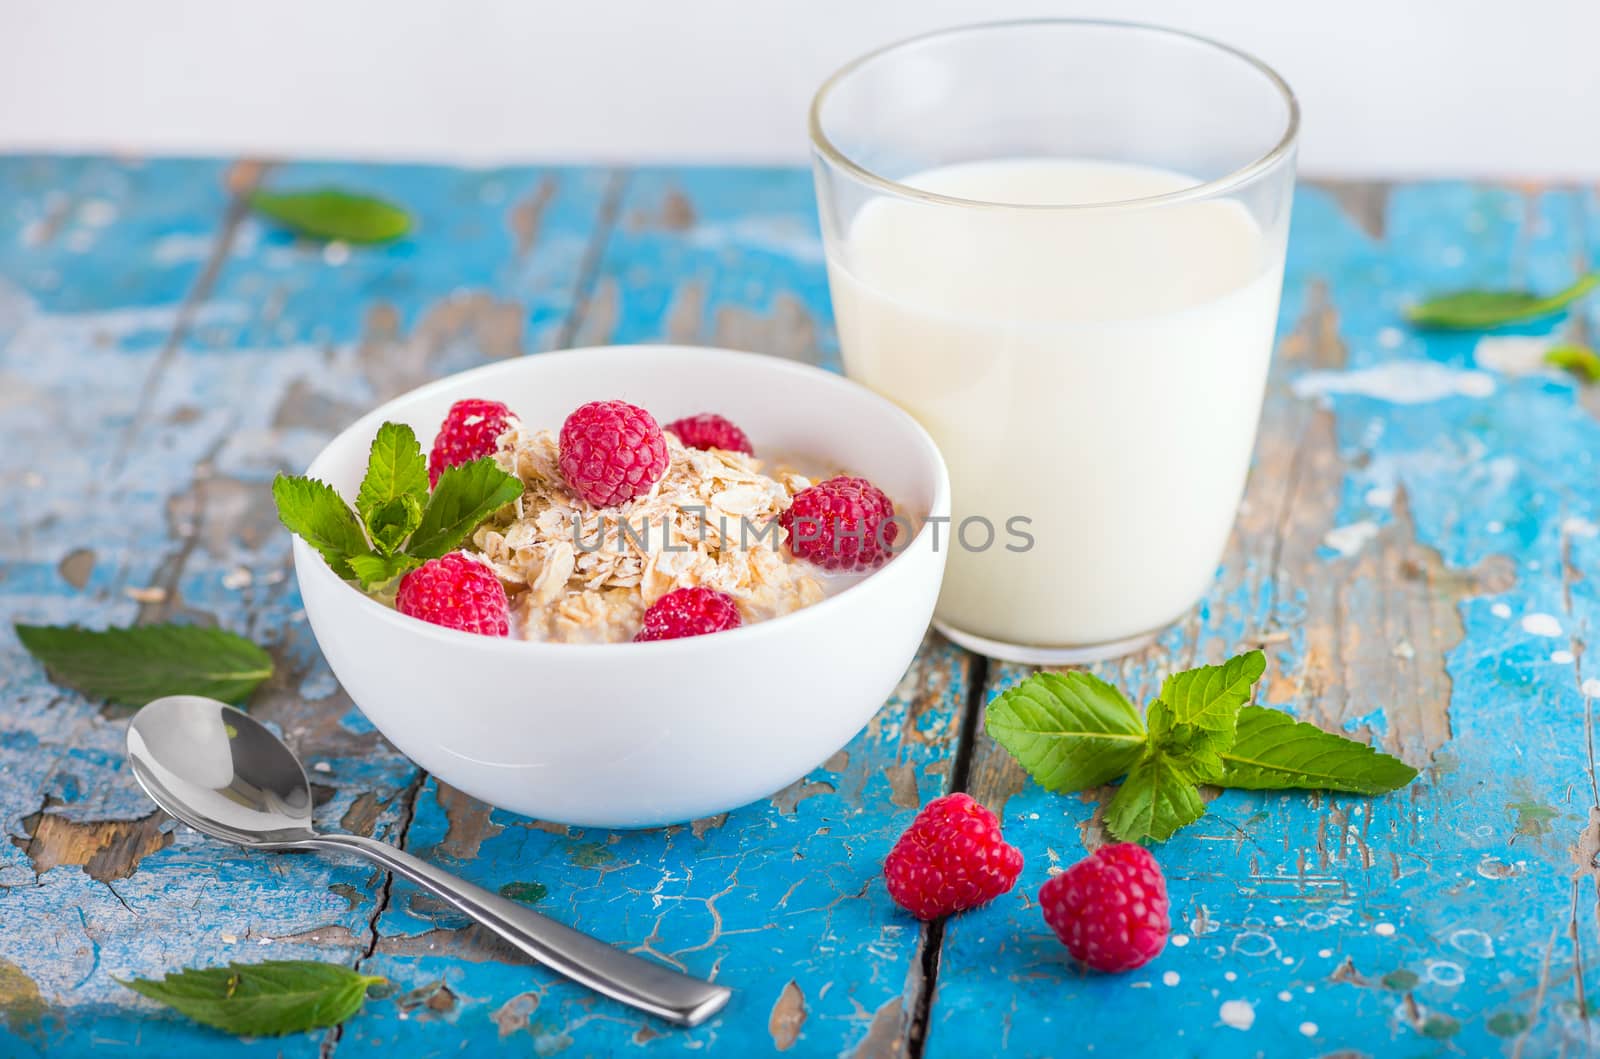 Oat flakes with milk and frash raspberries for breakfast, glass with milk, spoon, fresh mint on an old wooden blue background. The concept of a healthy diet, weight loss